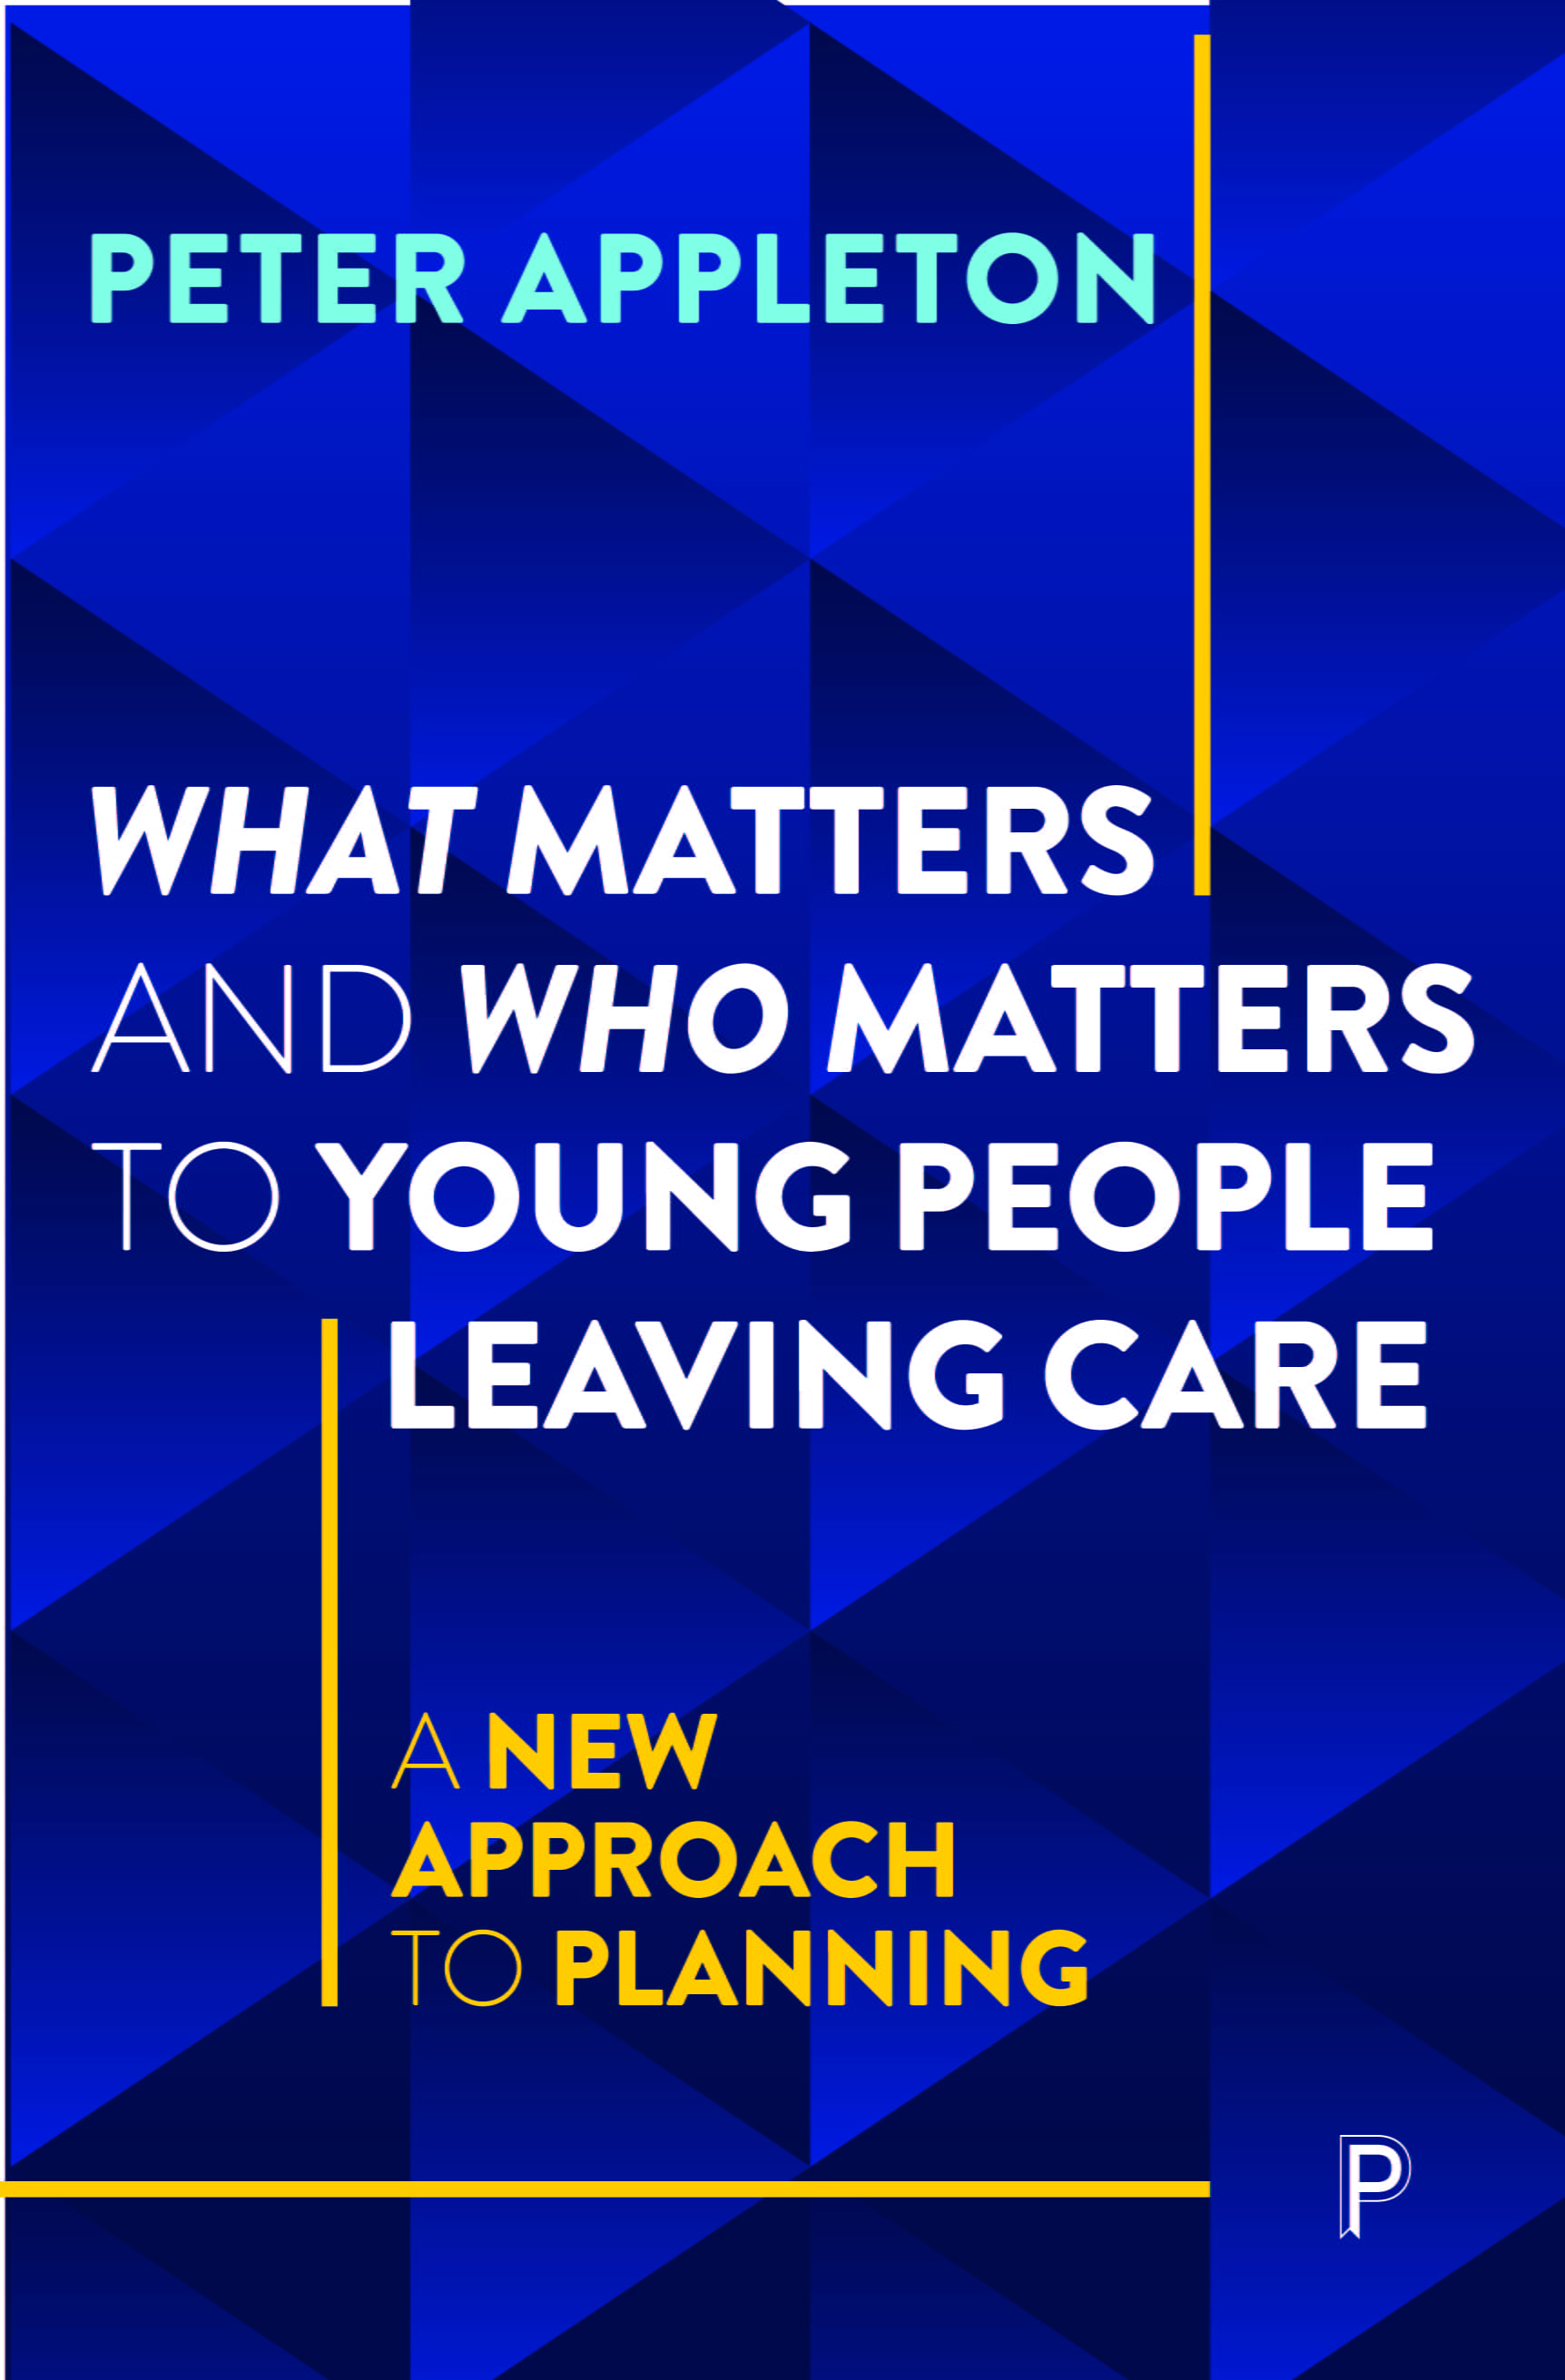 Book cover of 'How do young people transitioning from care plan their future lives? '